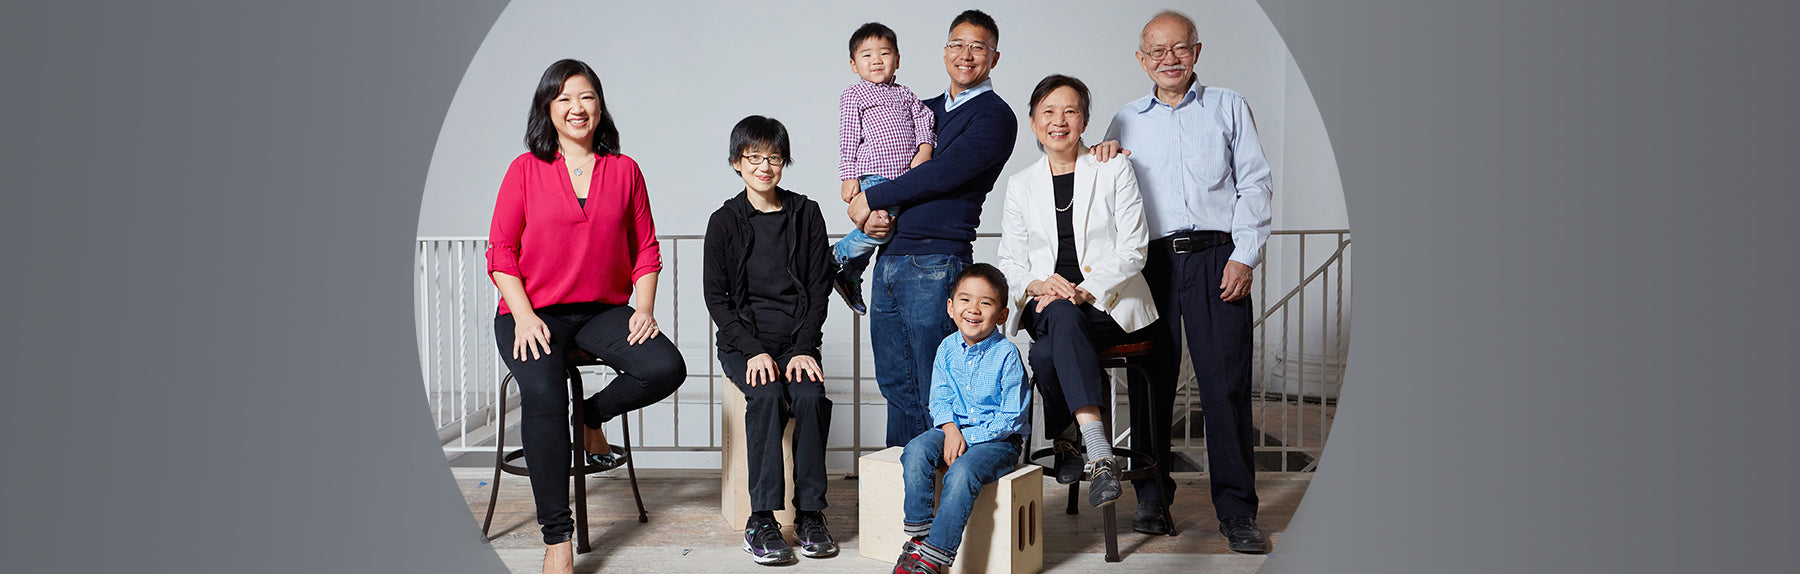 From left to right, Joanne Kwong, Michelle Chen, Gene Hu holding son, second son seated, and Mr. and Mrs. Chen